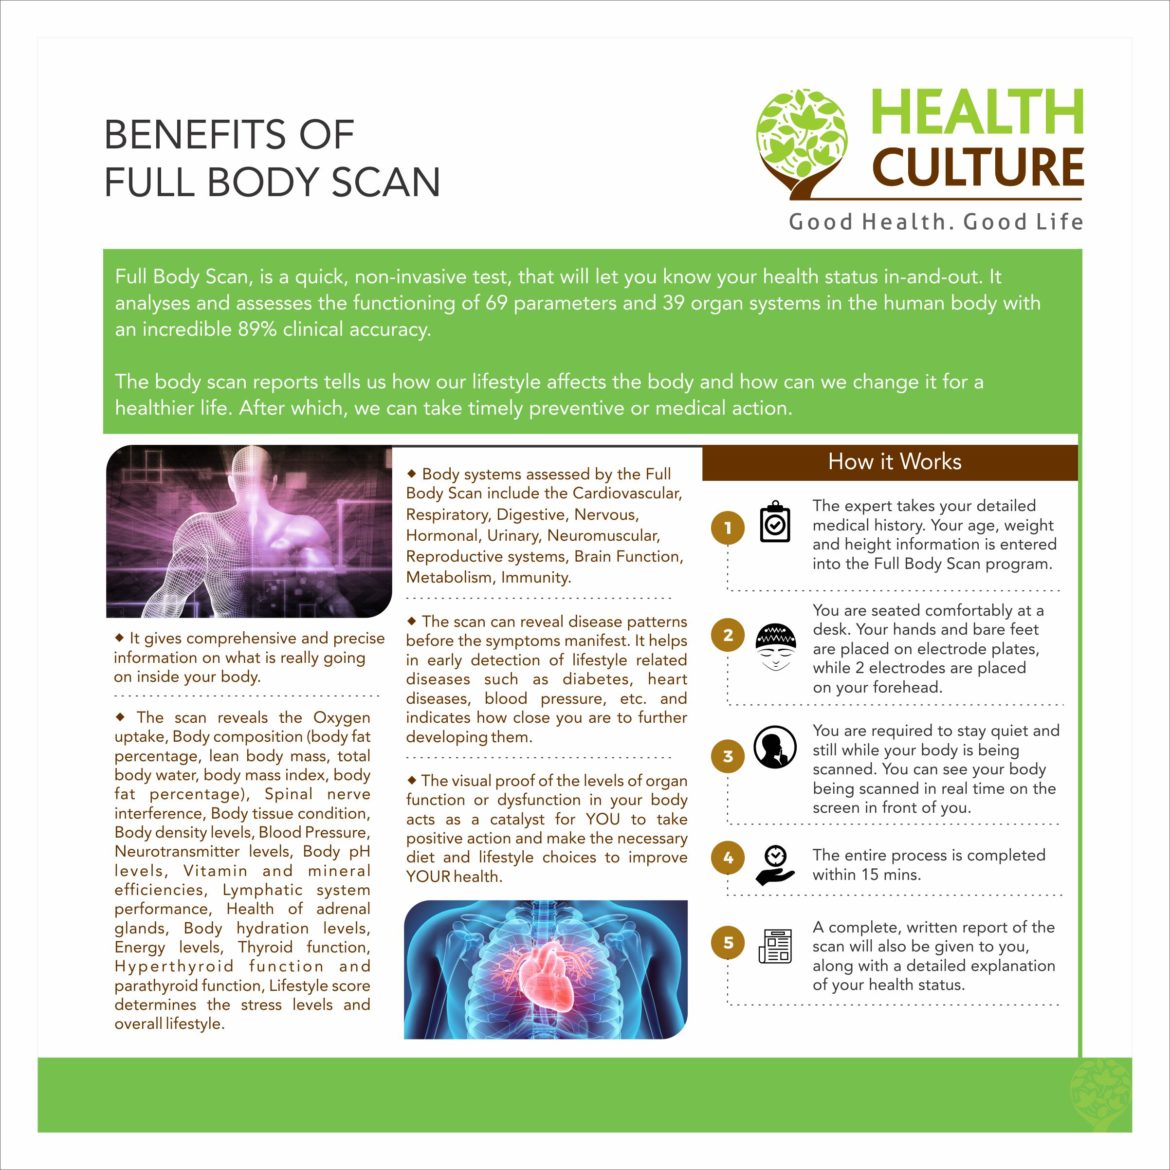 Benefits of Full Body Scan Article - Health Culture